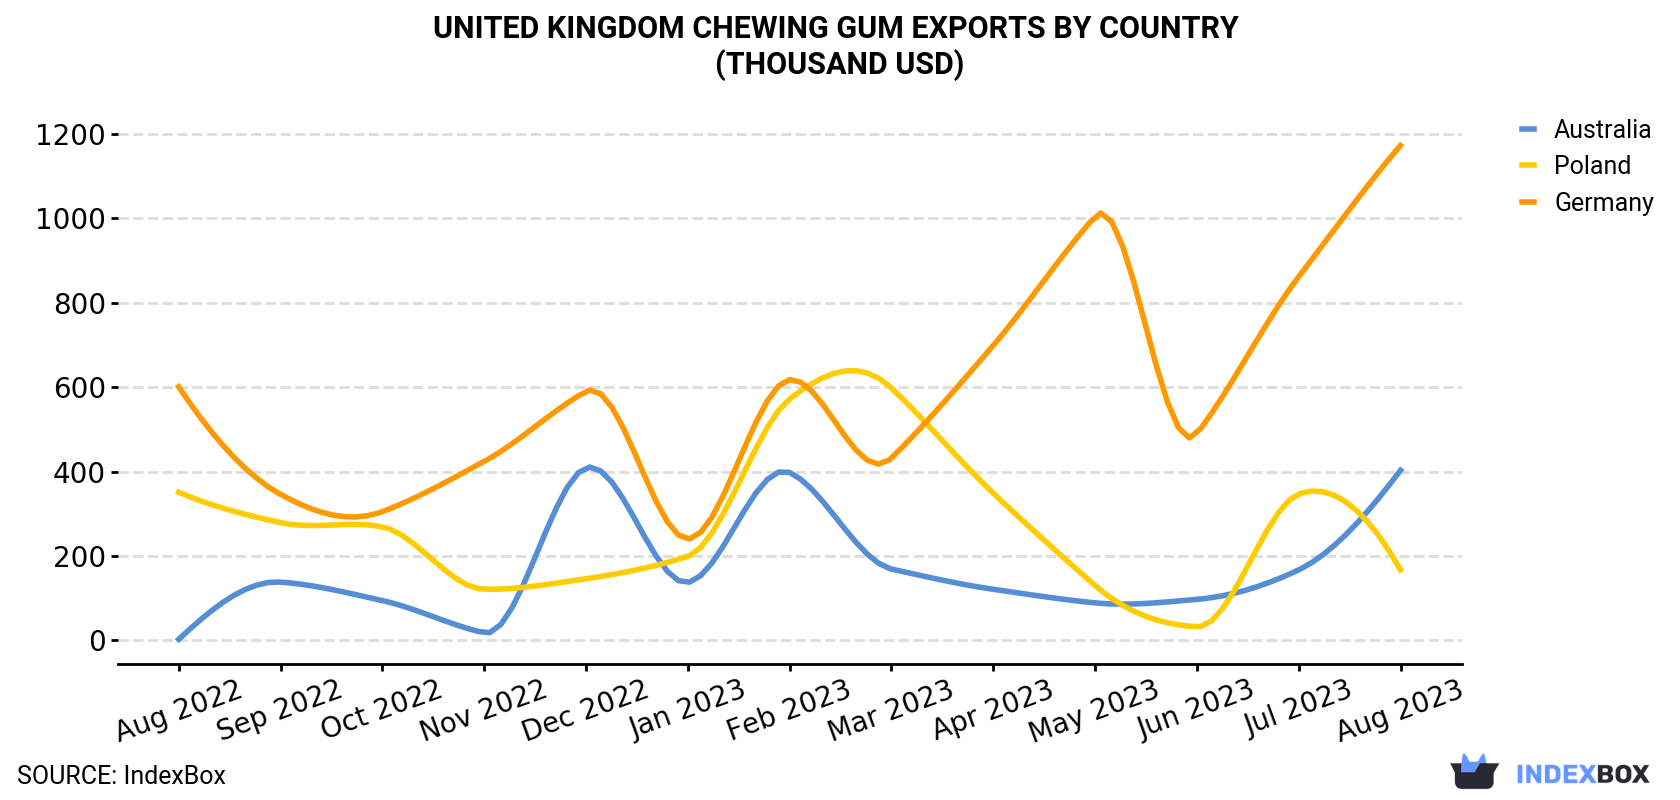 United Kingdom Chewing Gum Exports By Country (Thousand USD)